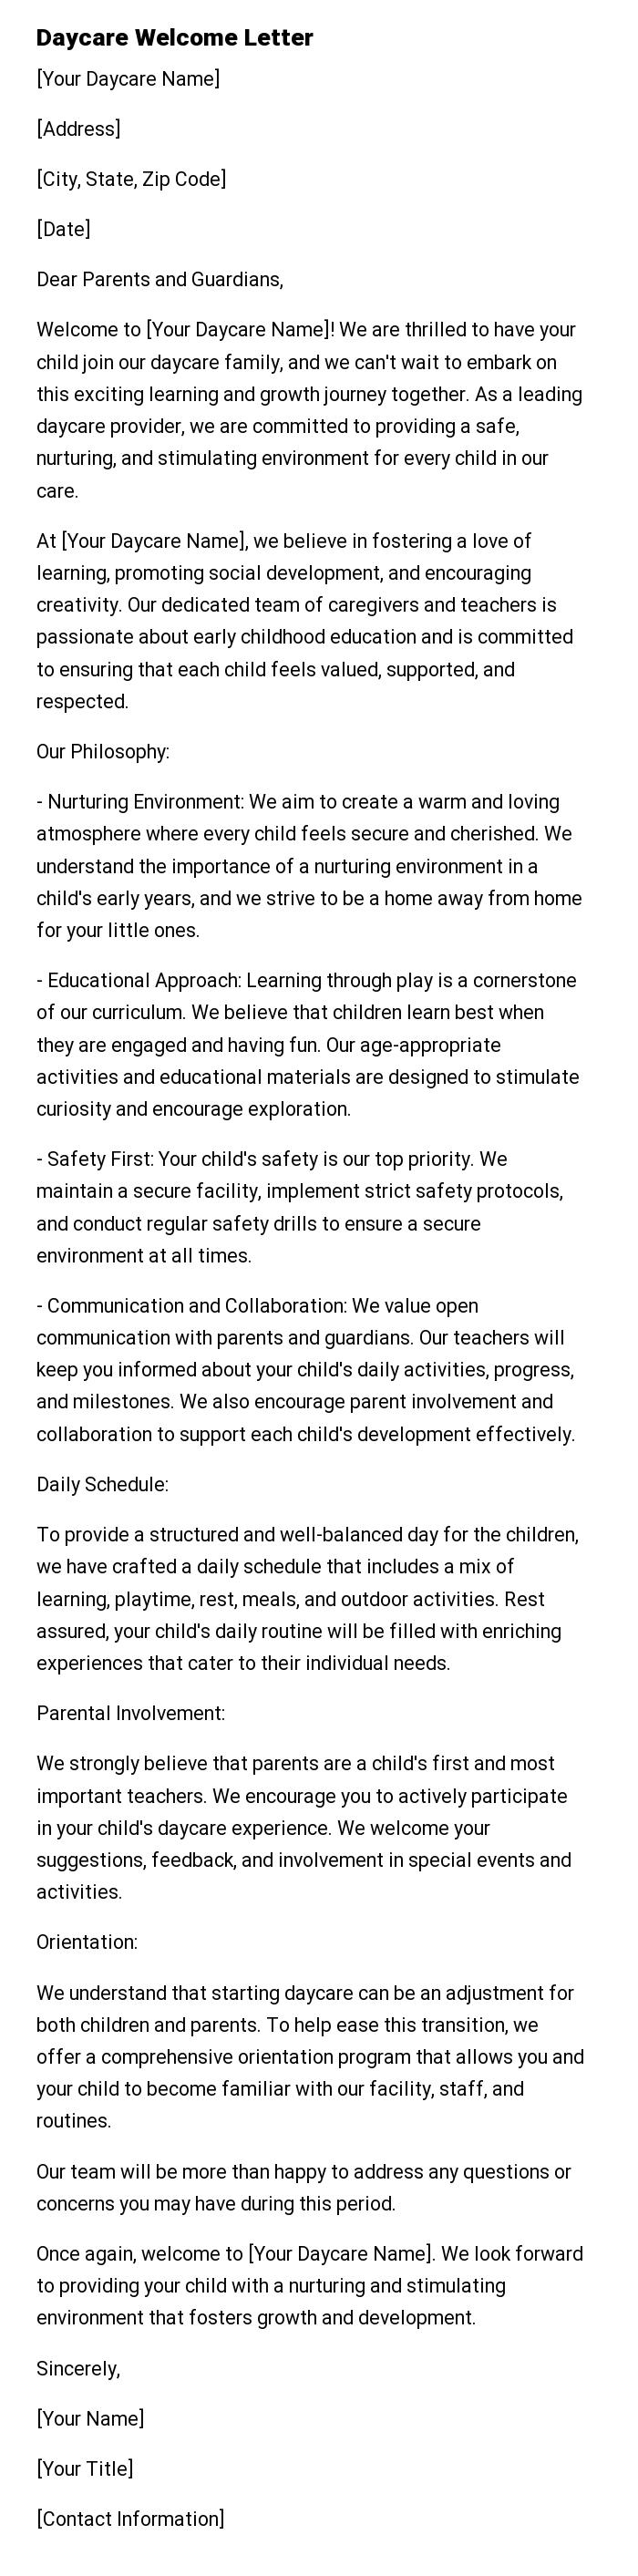 Daycare Welcome Letter